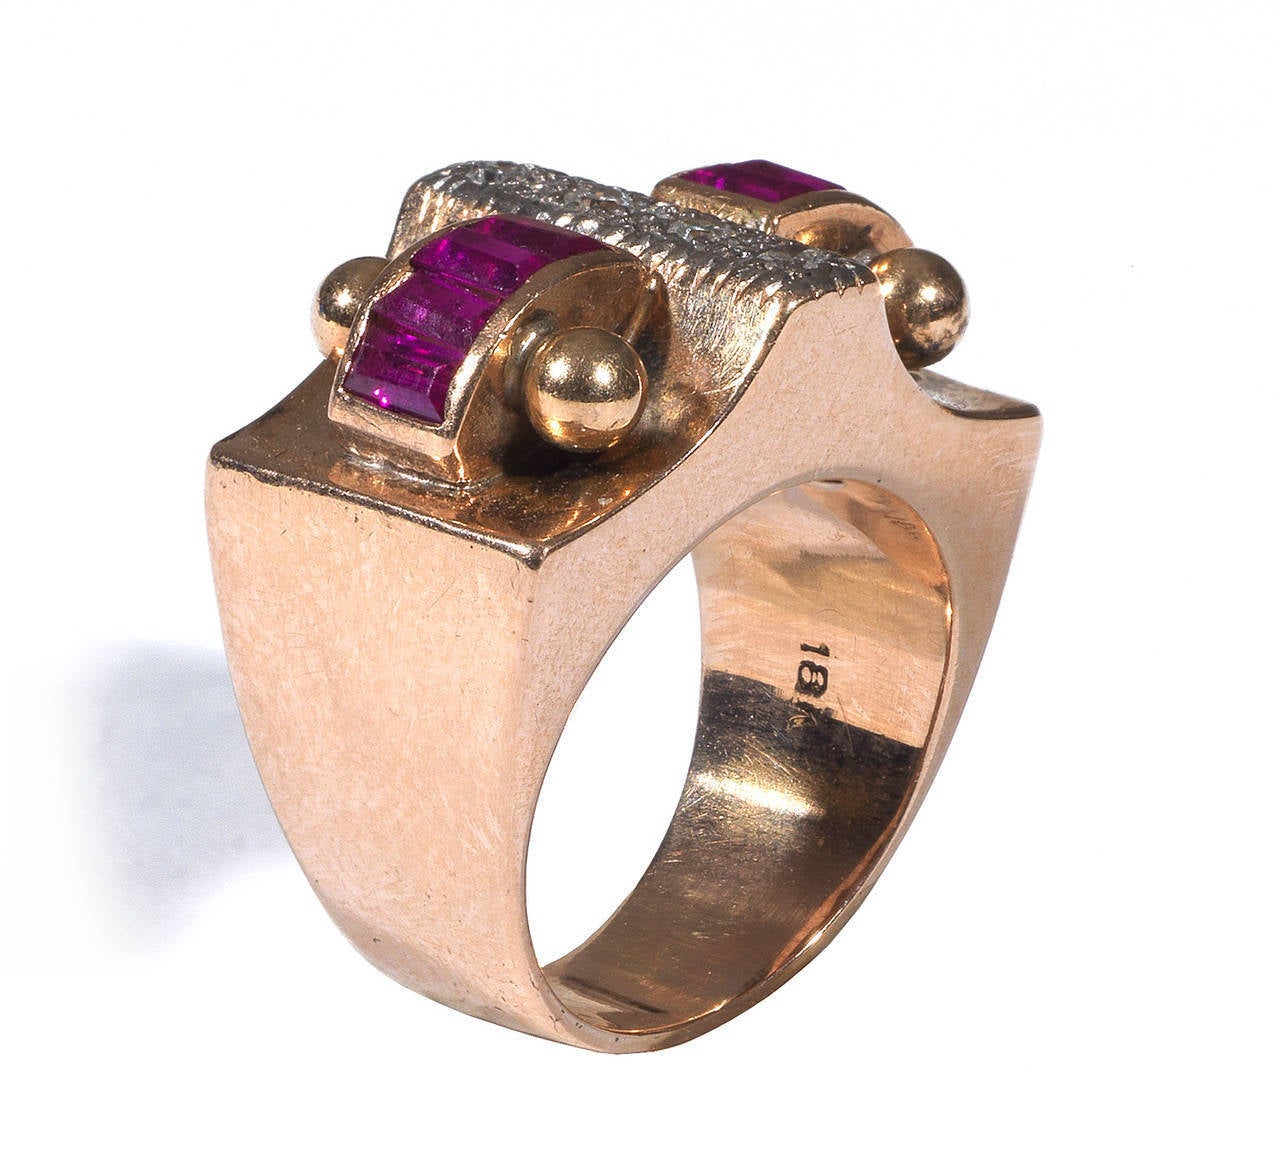 A retro ring designed with at the centre a platinum section set with four diamonds, at the sides four calibre cut rubies bordered by four balls, to a plain hoop.

Mounted in 18Kt rose gold and platinum.

Size: 6 1/2
Weight: 10.1 gr